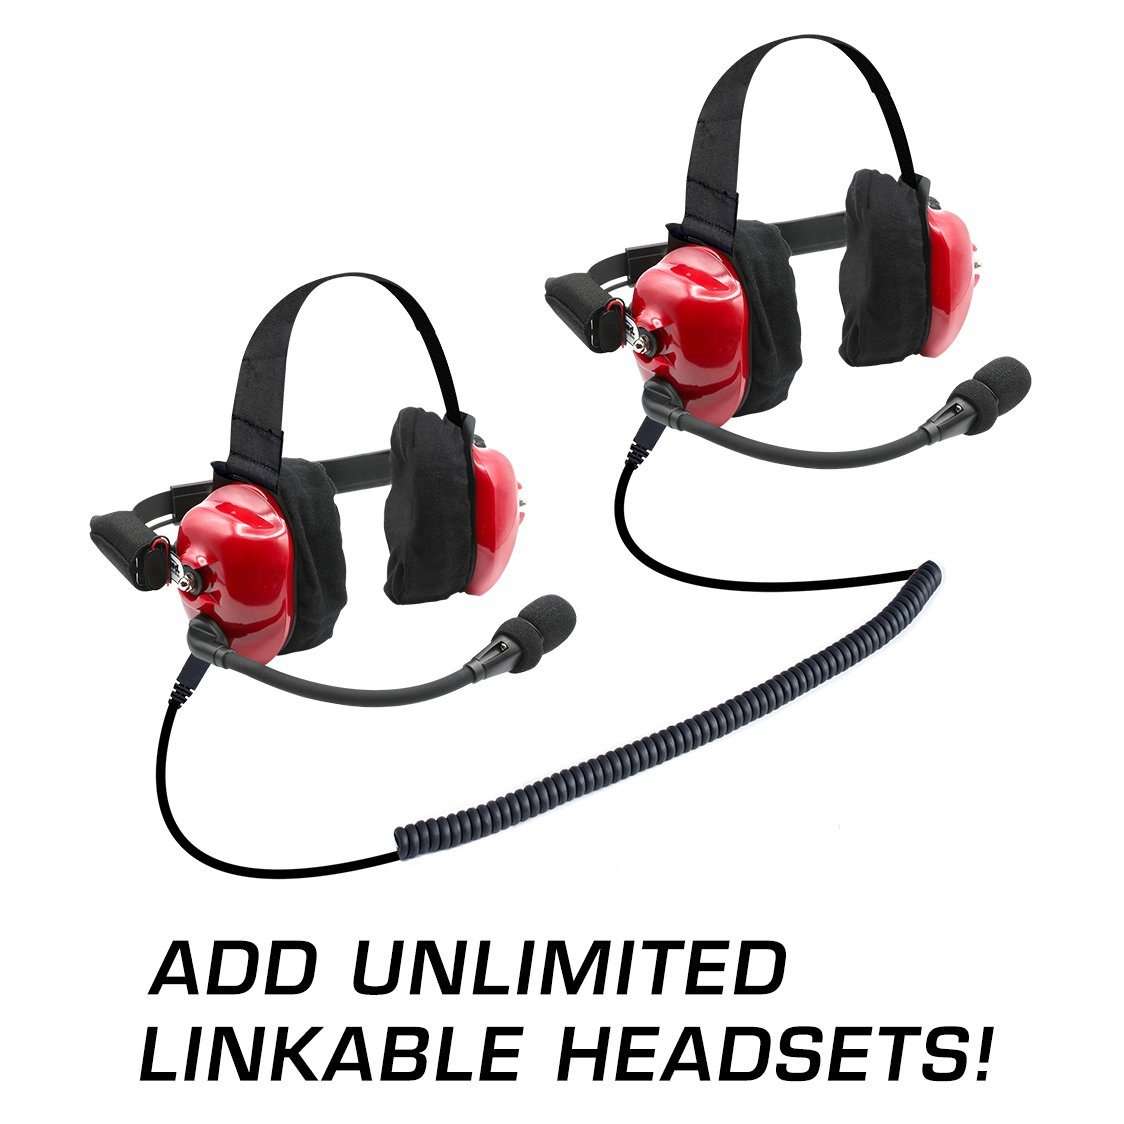 NASCAR Race Fan Linkable Intercom Scanner Over The Ear Two Way Headsets w Mic Cables Nitro Bee Receiver and Carry Bag - 3